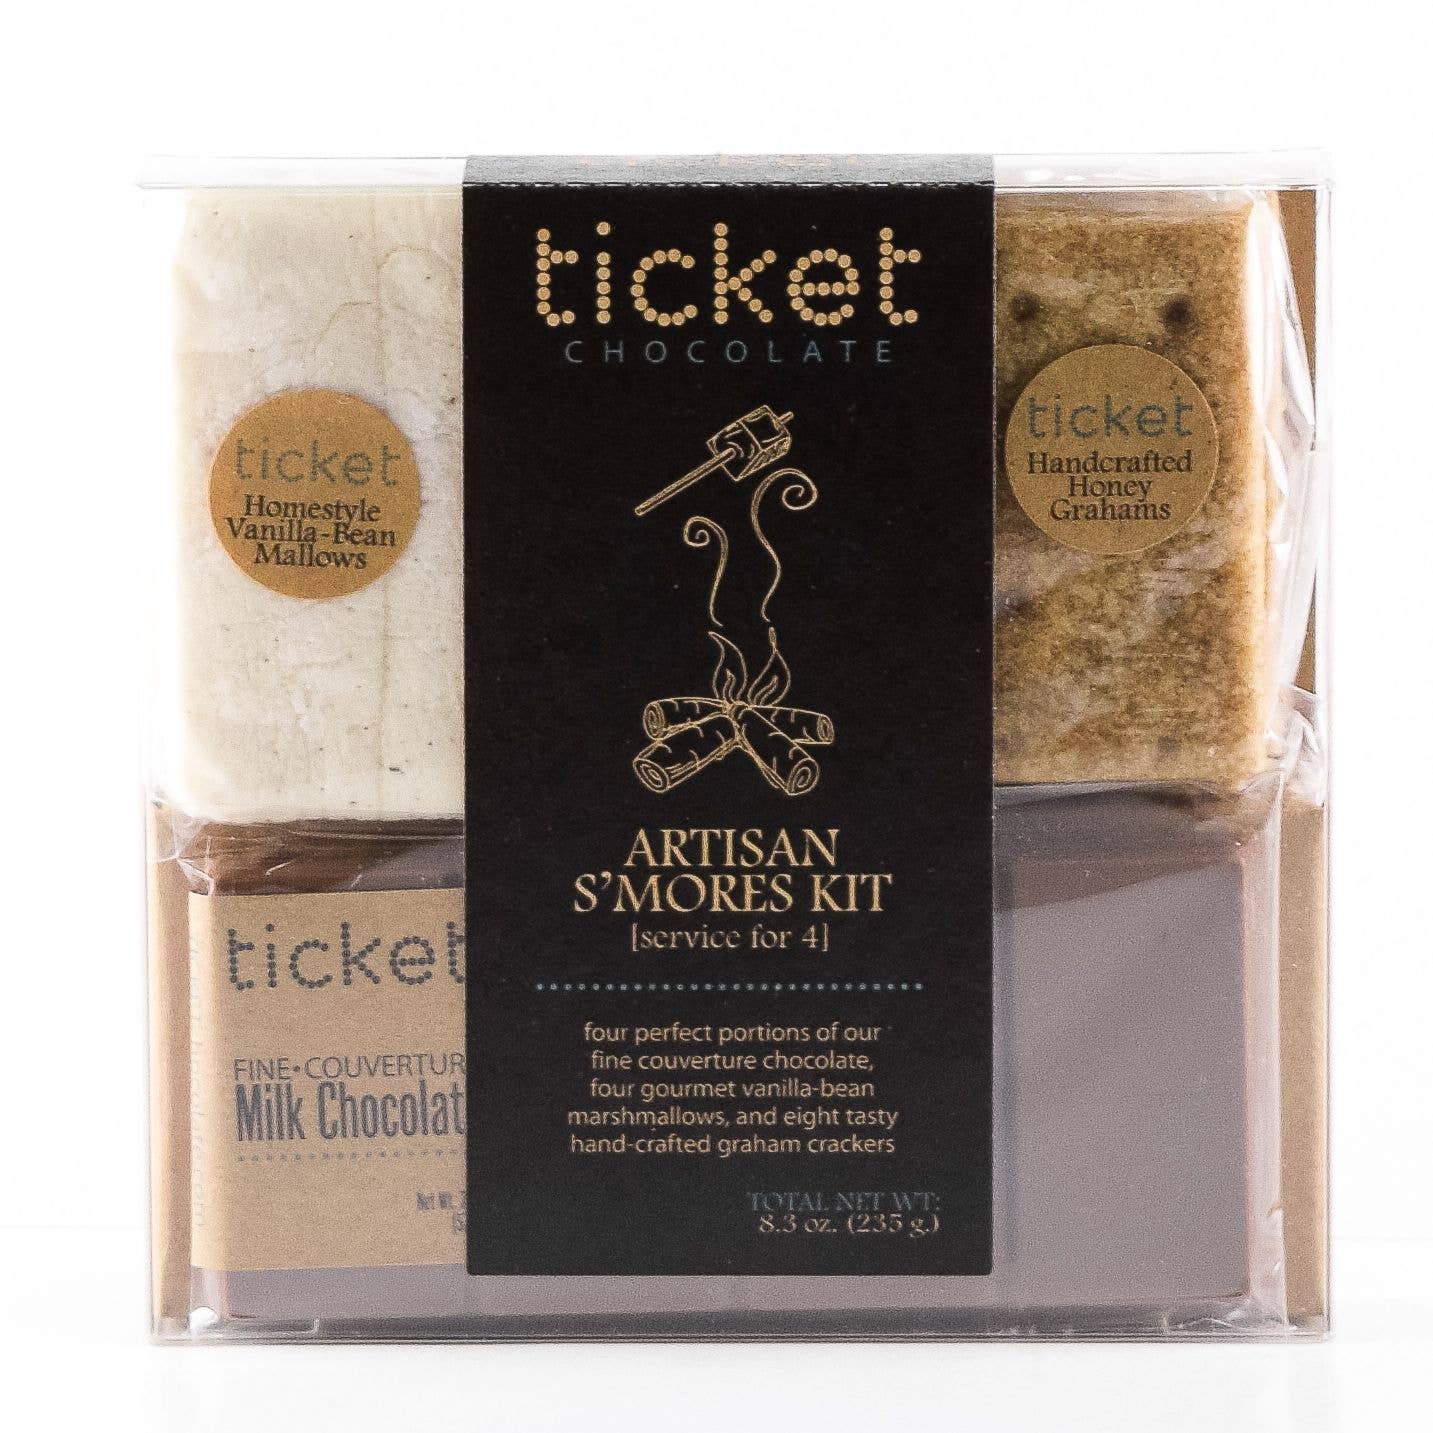 Ticket Chocolate - Classic - Artisan Smores Kits - Service for Four